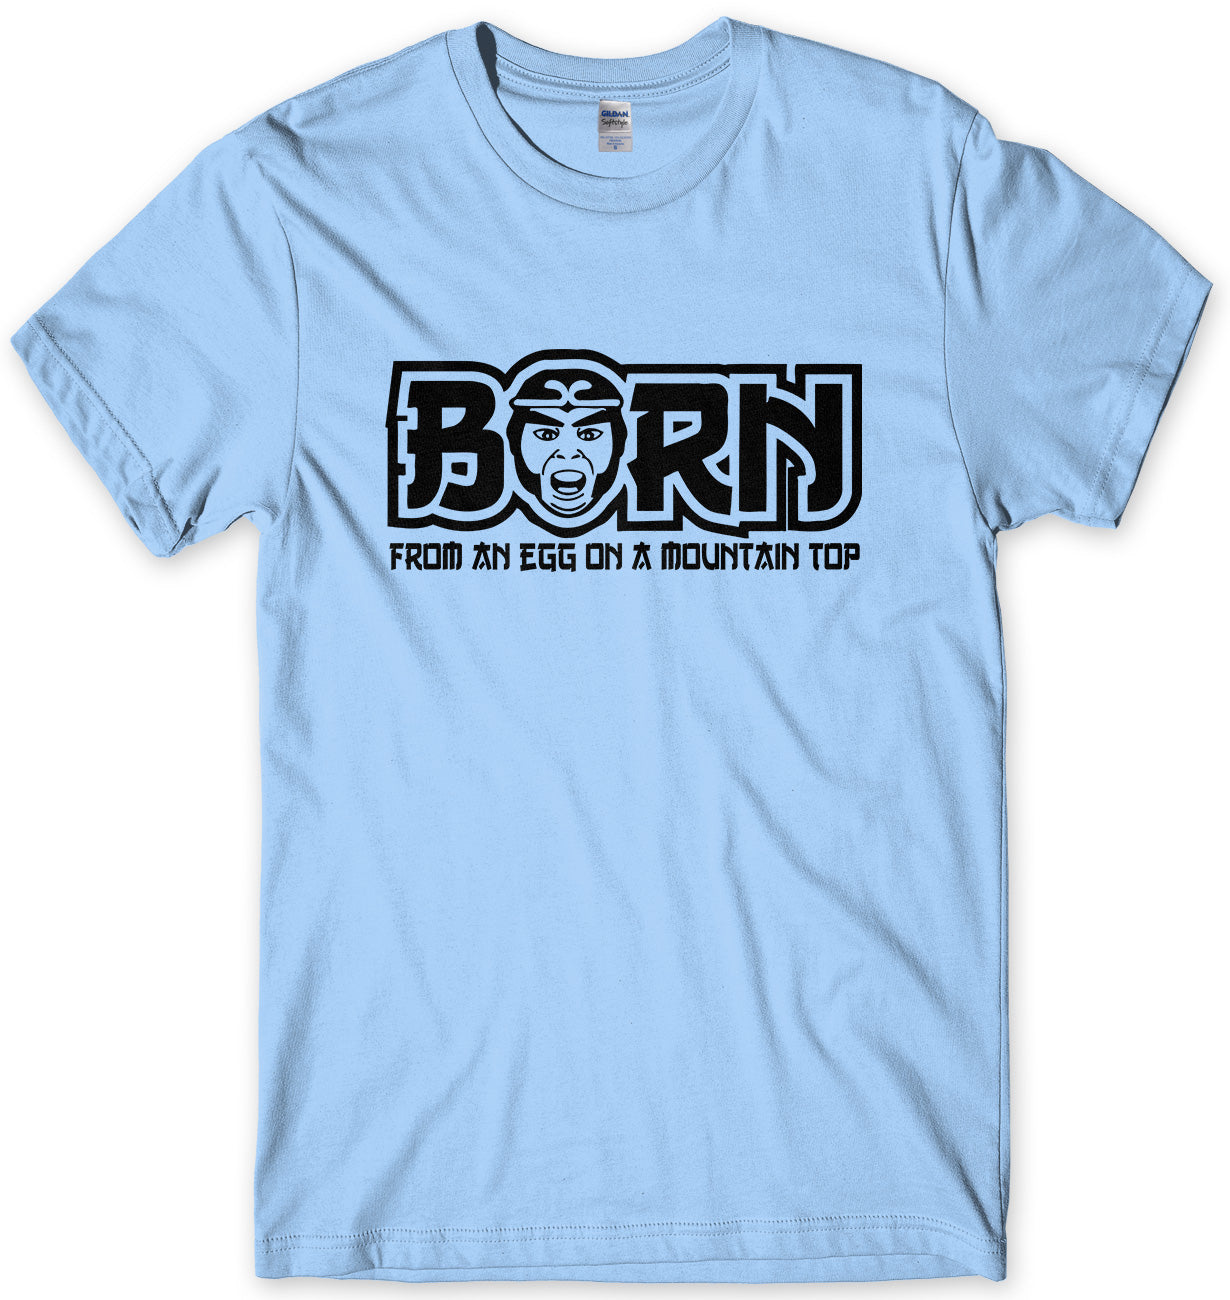 BORN FROM AN EGG - INSPIRED BY MONKEY MAGIC MENS UNISEX T-SHIRT